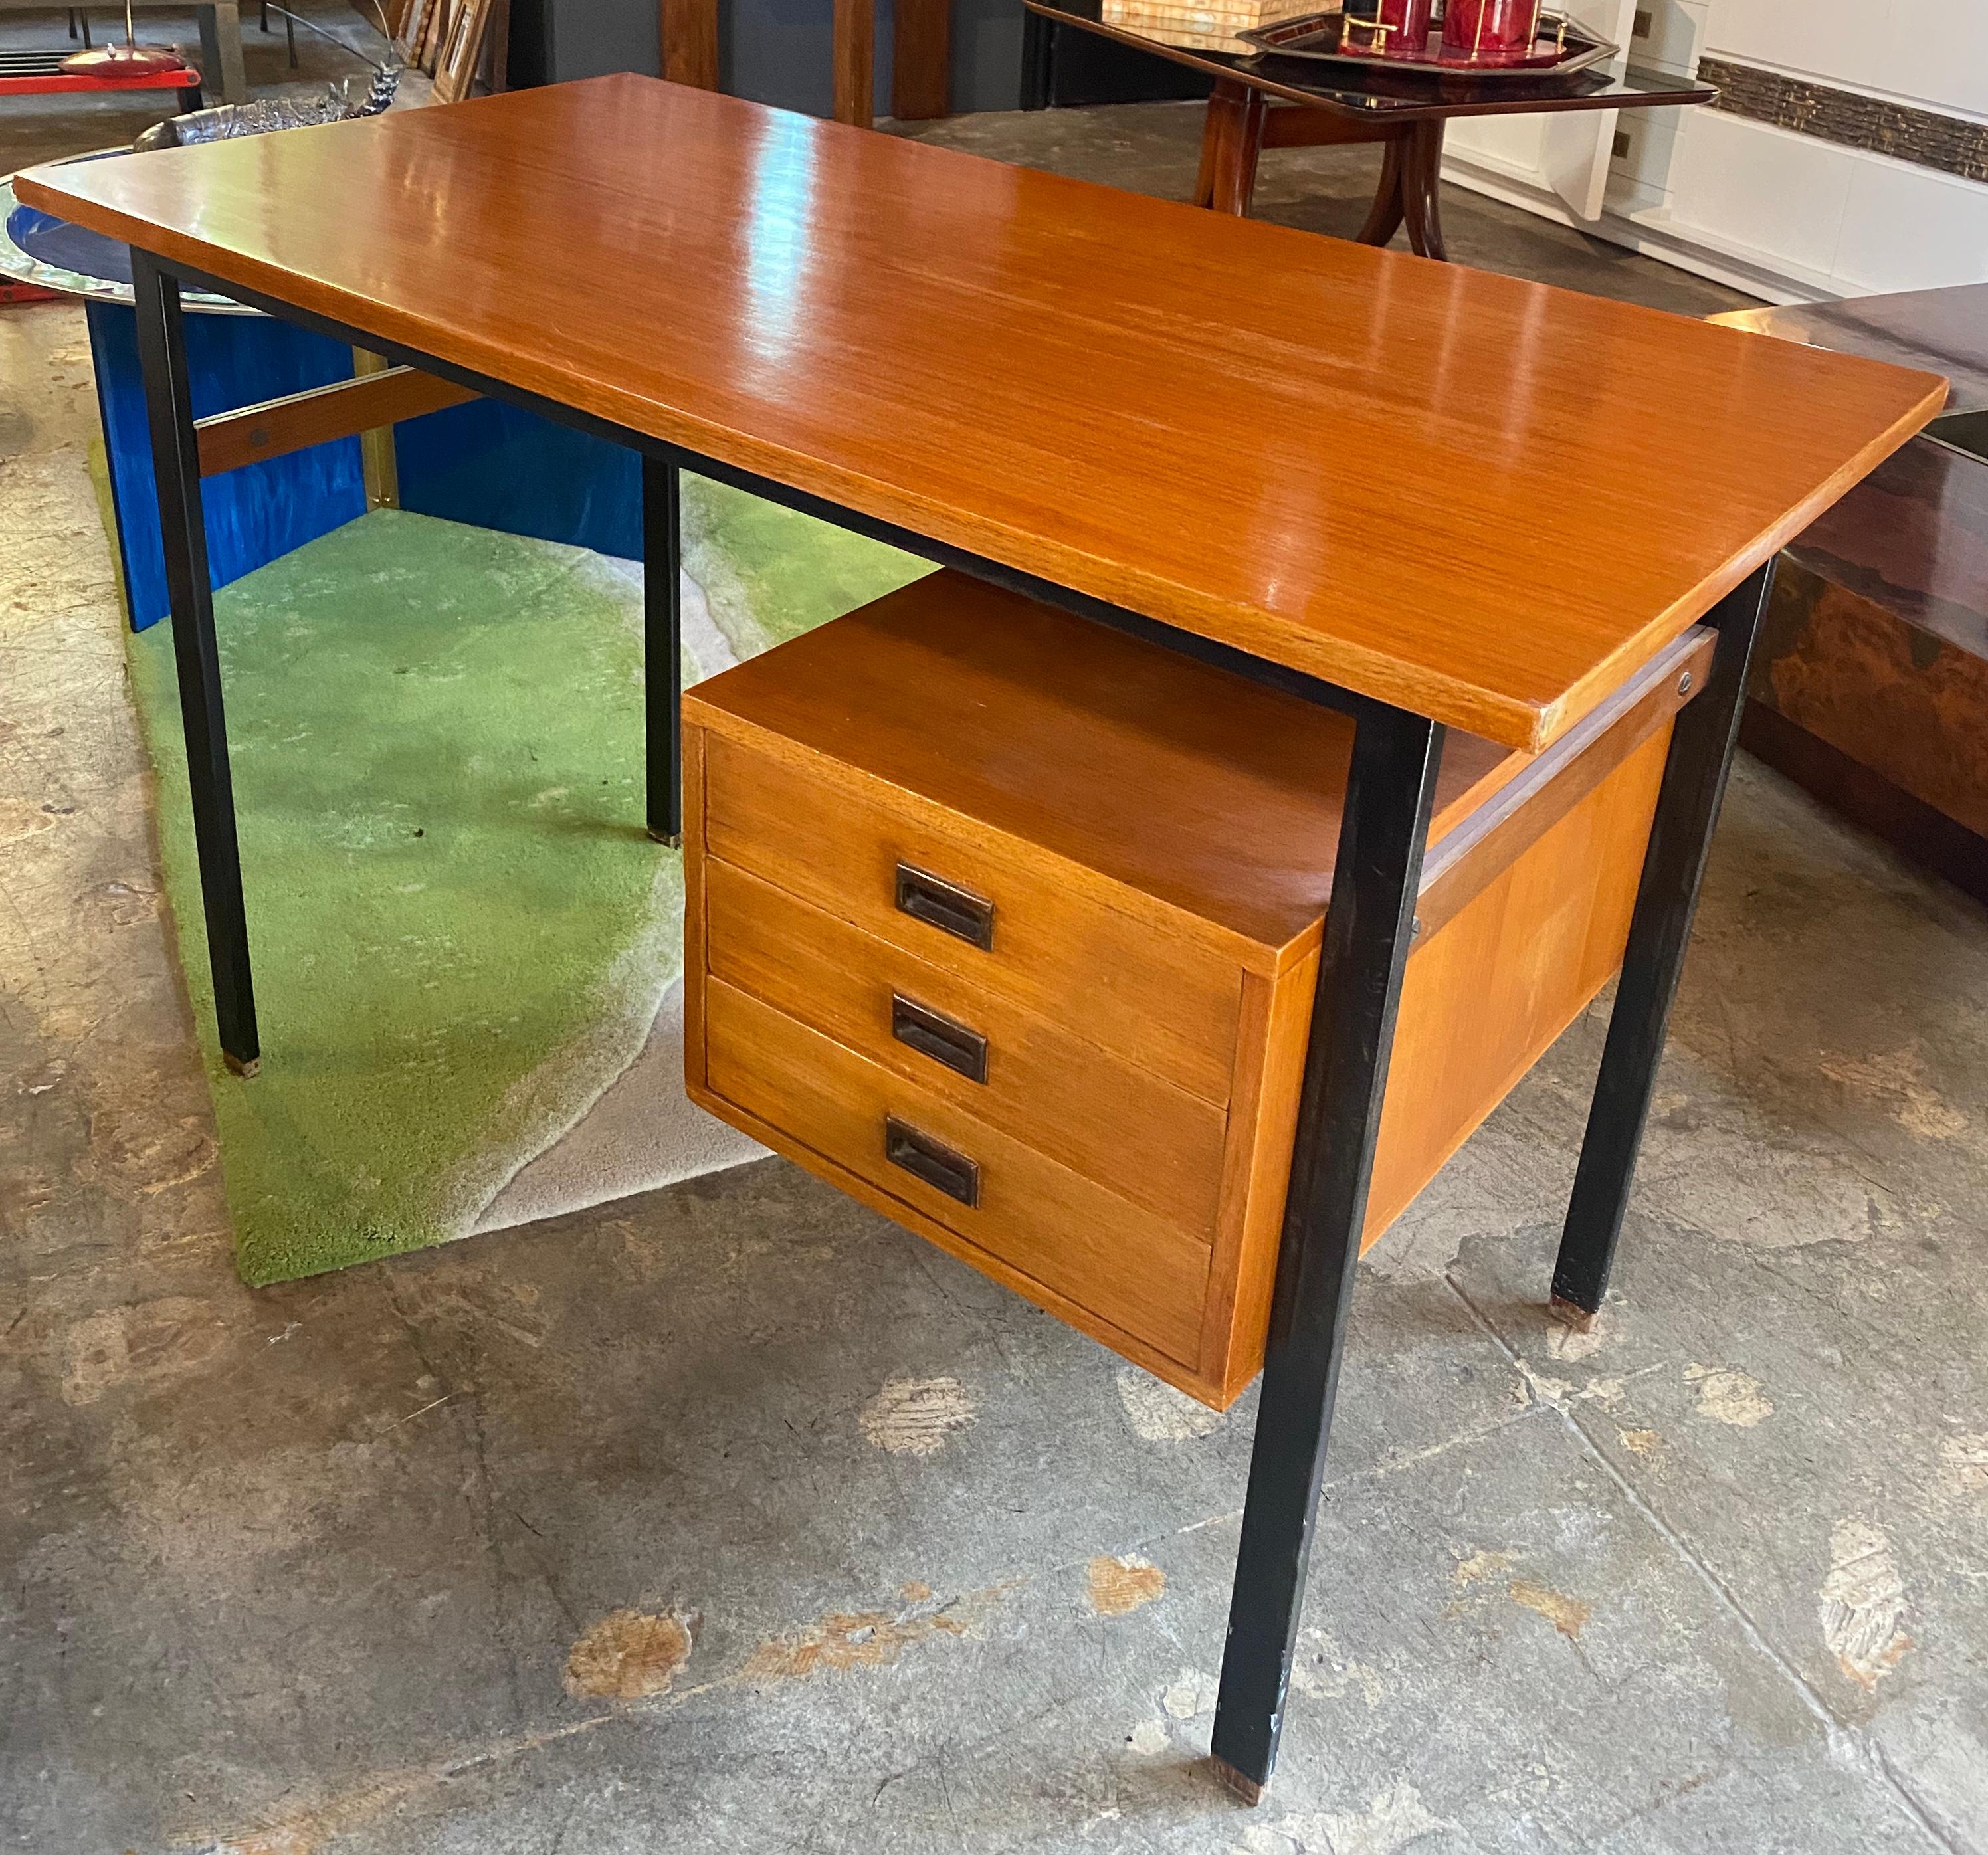 Beautiful Mid-Century Modern Italian desk with 3 side drawers in brown wood.
Nothing touches, nothing clashes, which gives this piece of furniture a completely peaceful yet strong expression. A piece like this will stand the test of time.